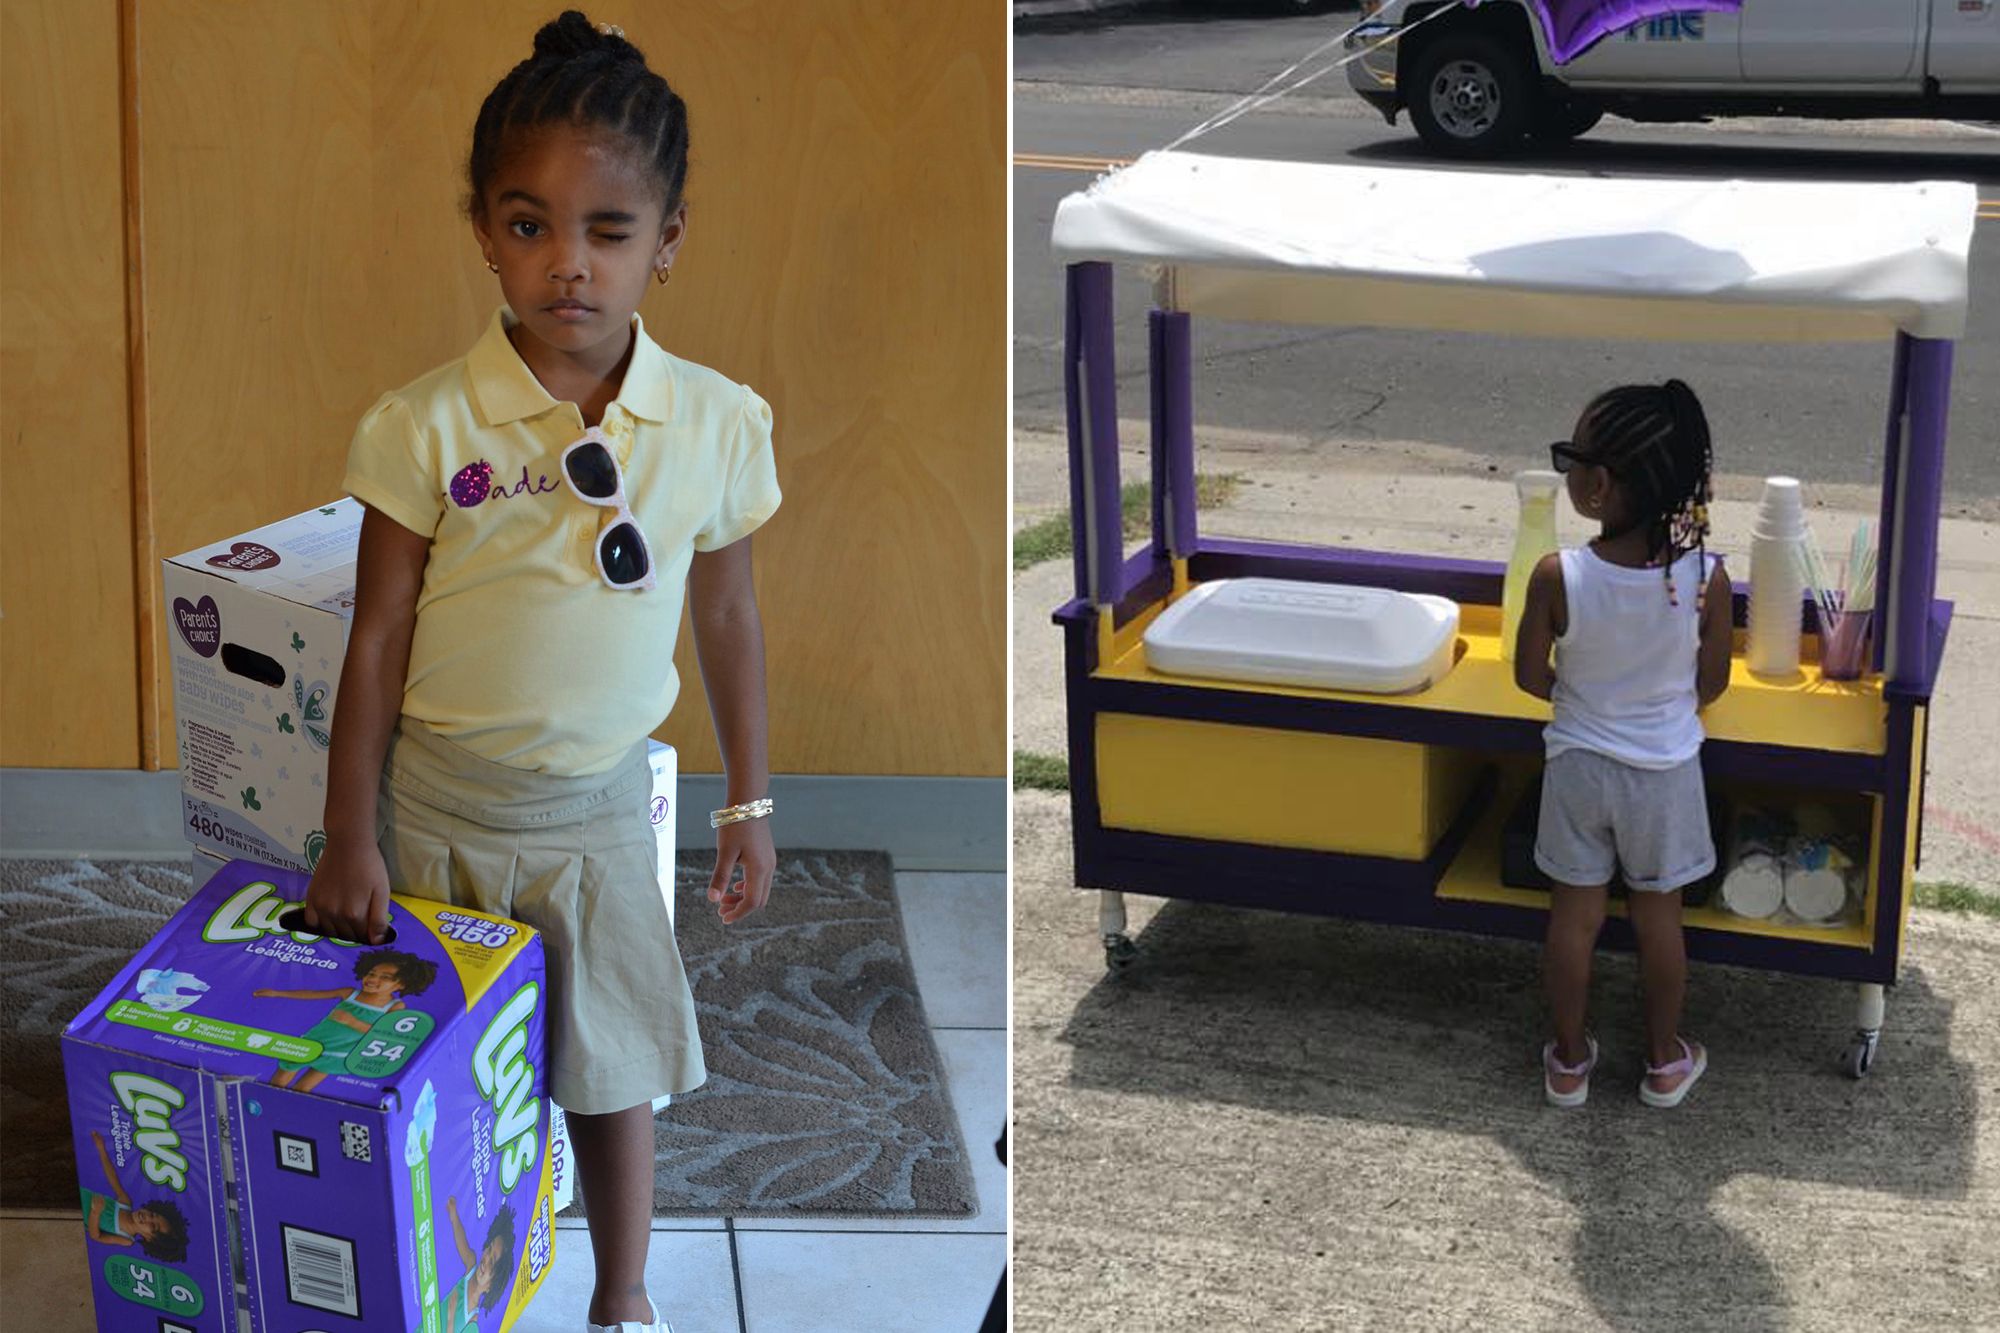 Touching Story: 3-Year-Old Used Lemonade Stand Profits To Buy Diapers For Mothers In Need